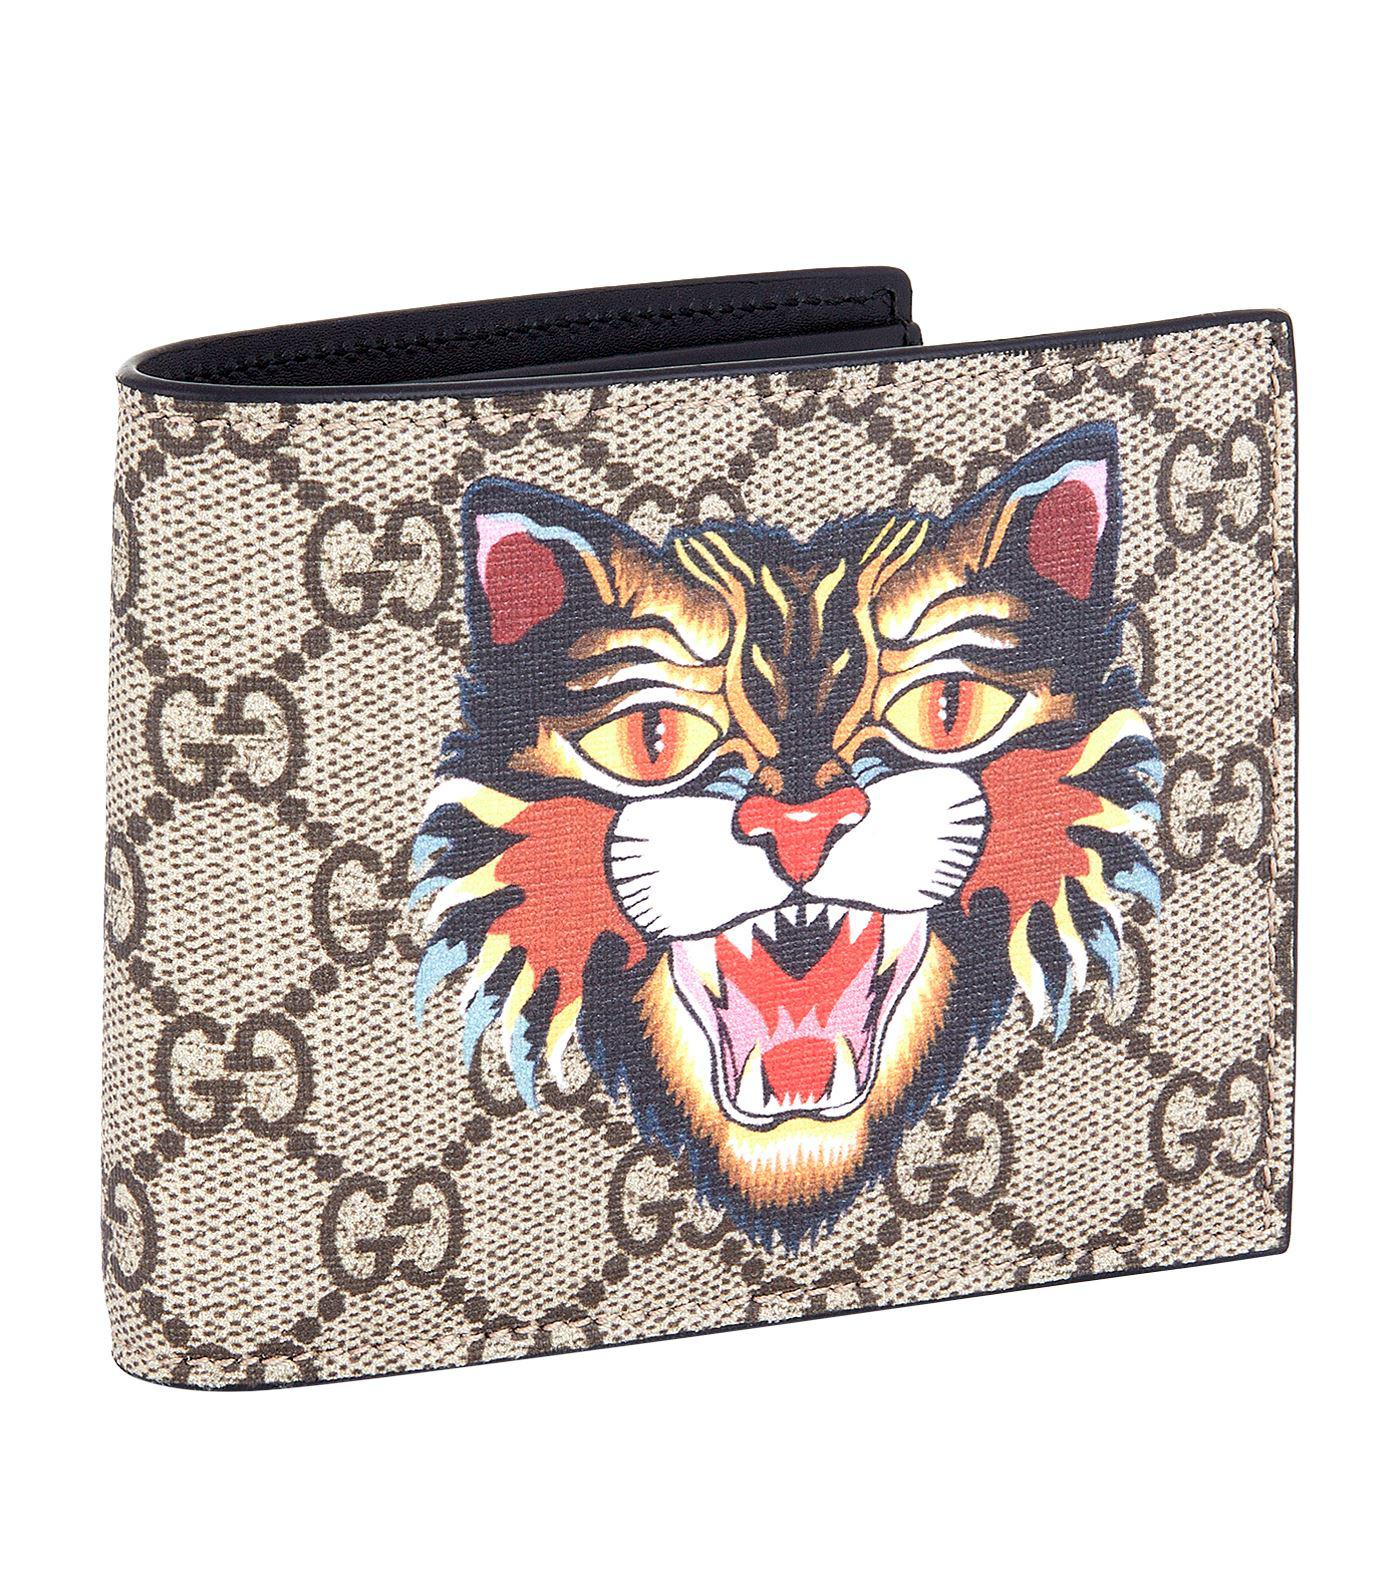 Gucci Canvas Angry Cat Bifold Wallet in Beige (Natural) - Lyst